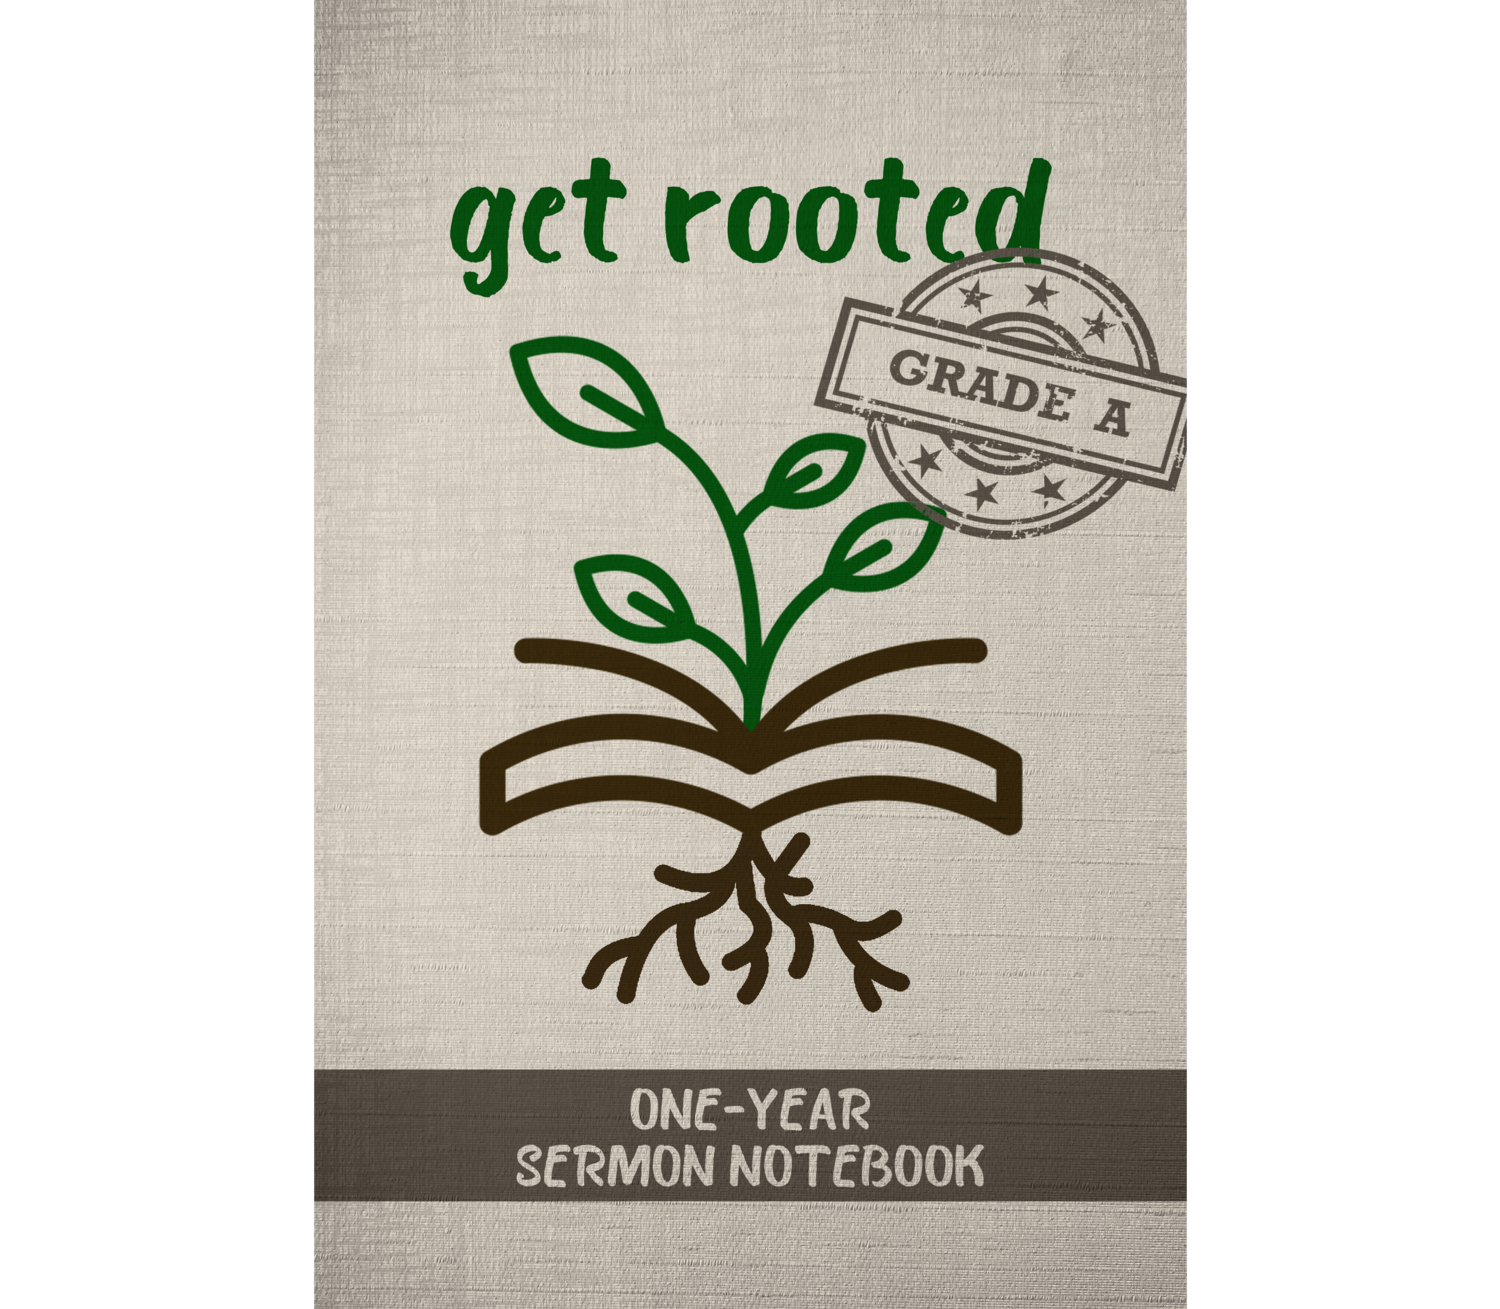 Get Rooted One-Year Sermon Notebook (Grade A)